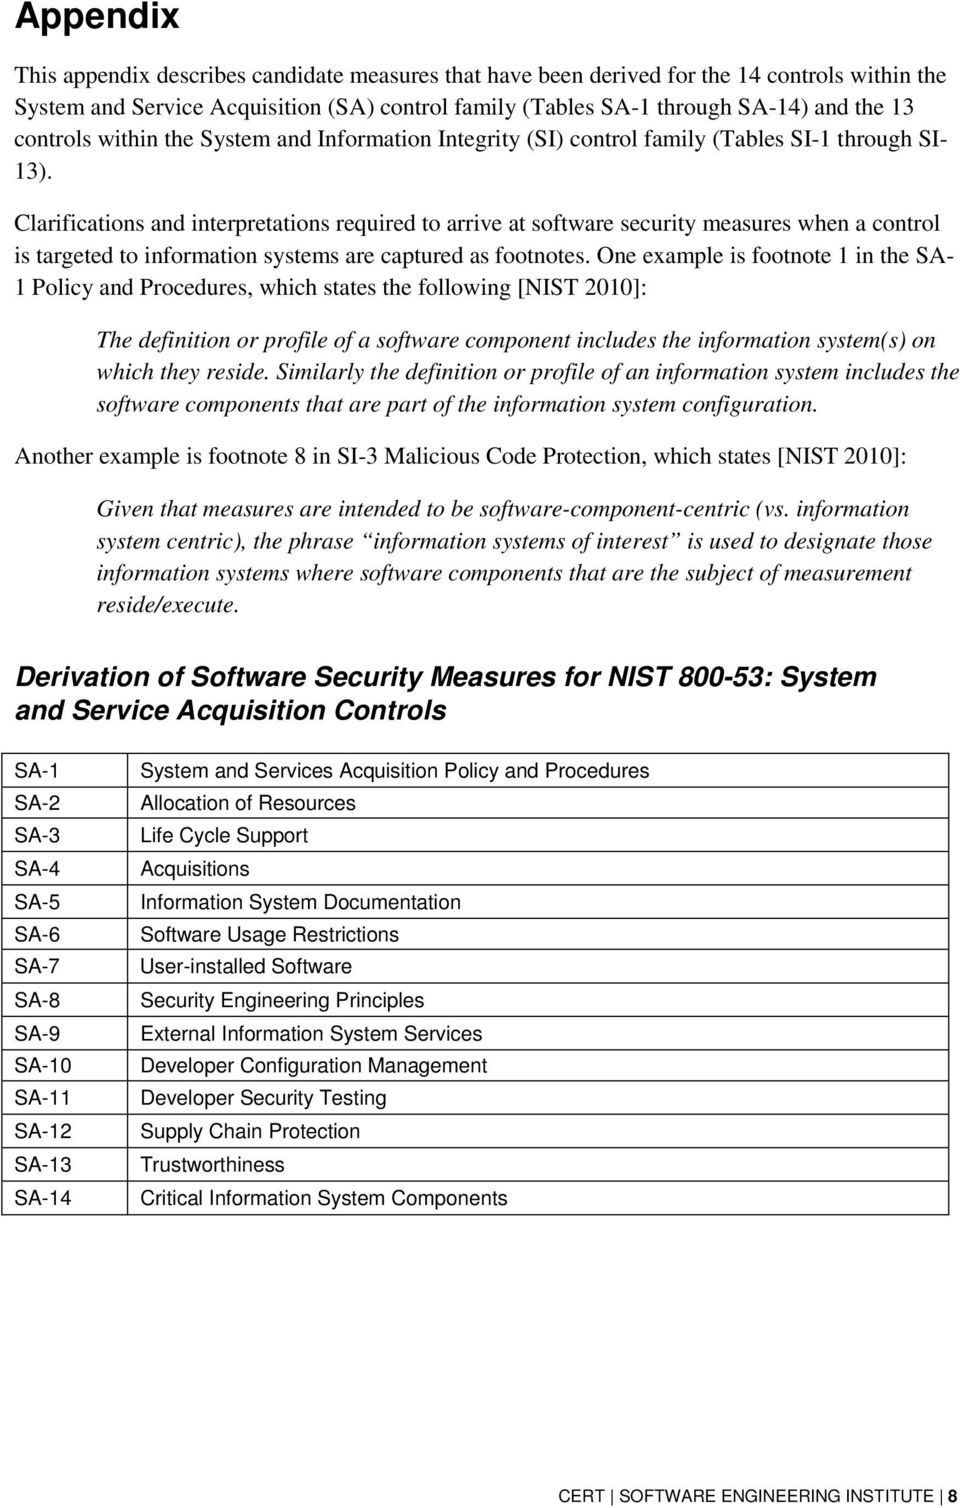 Clarifications and interpretations required to arrive at software security measures when a control is targeted to information systems are captured as footnotes.